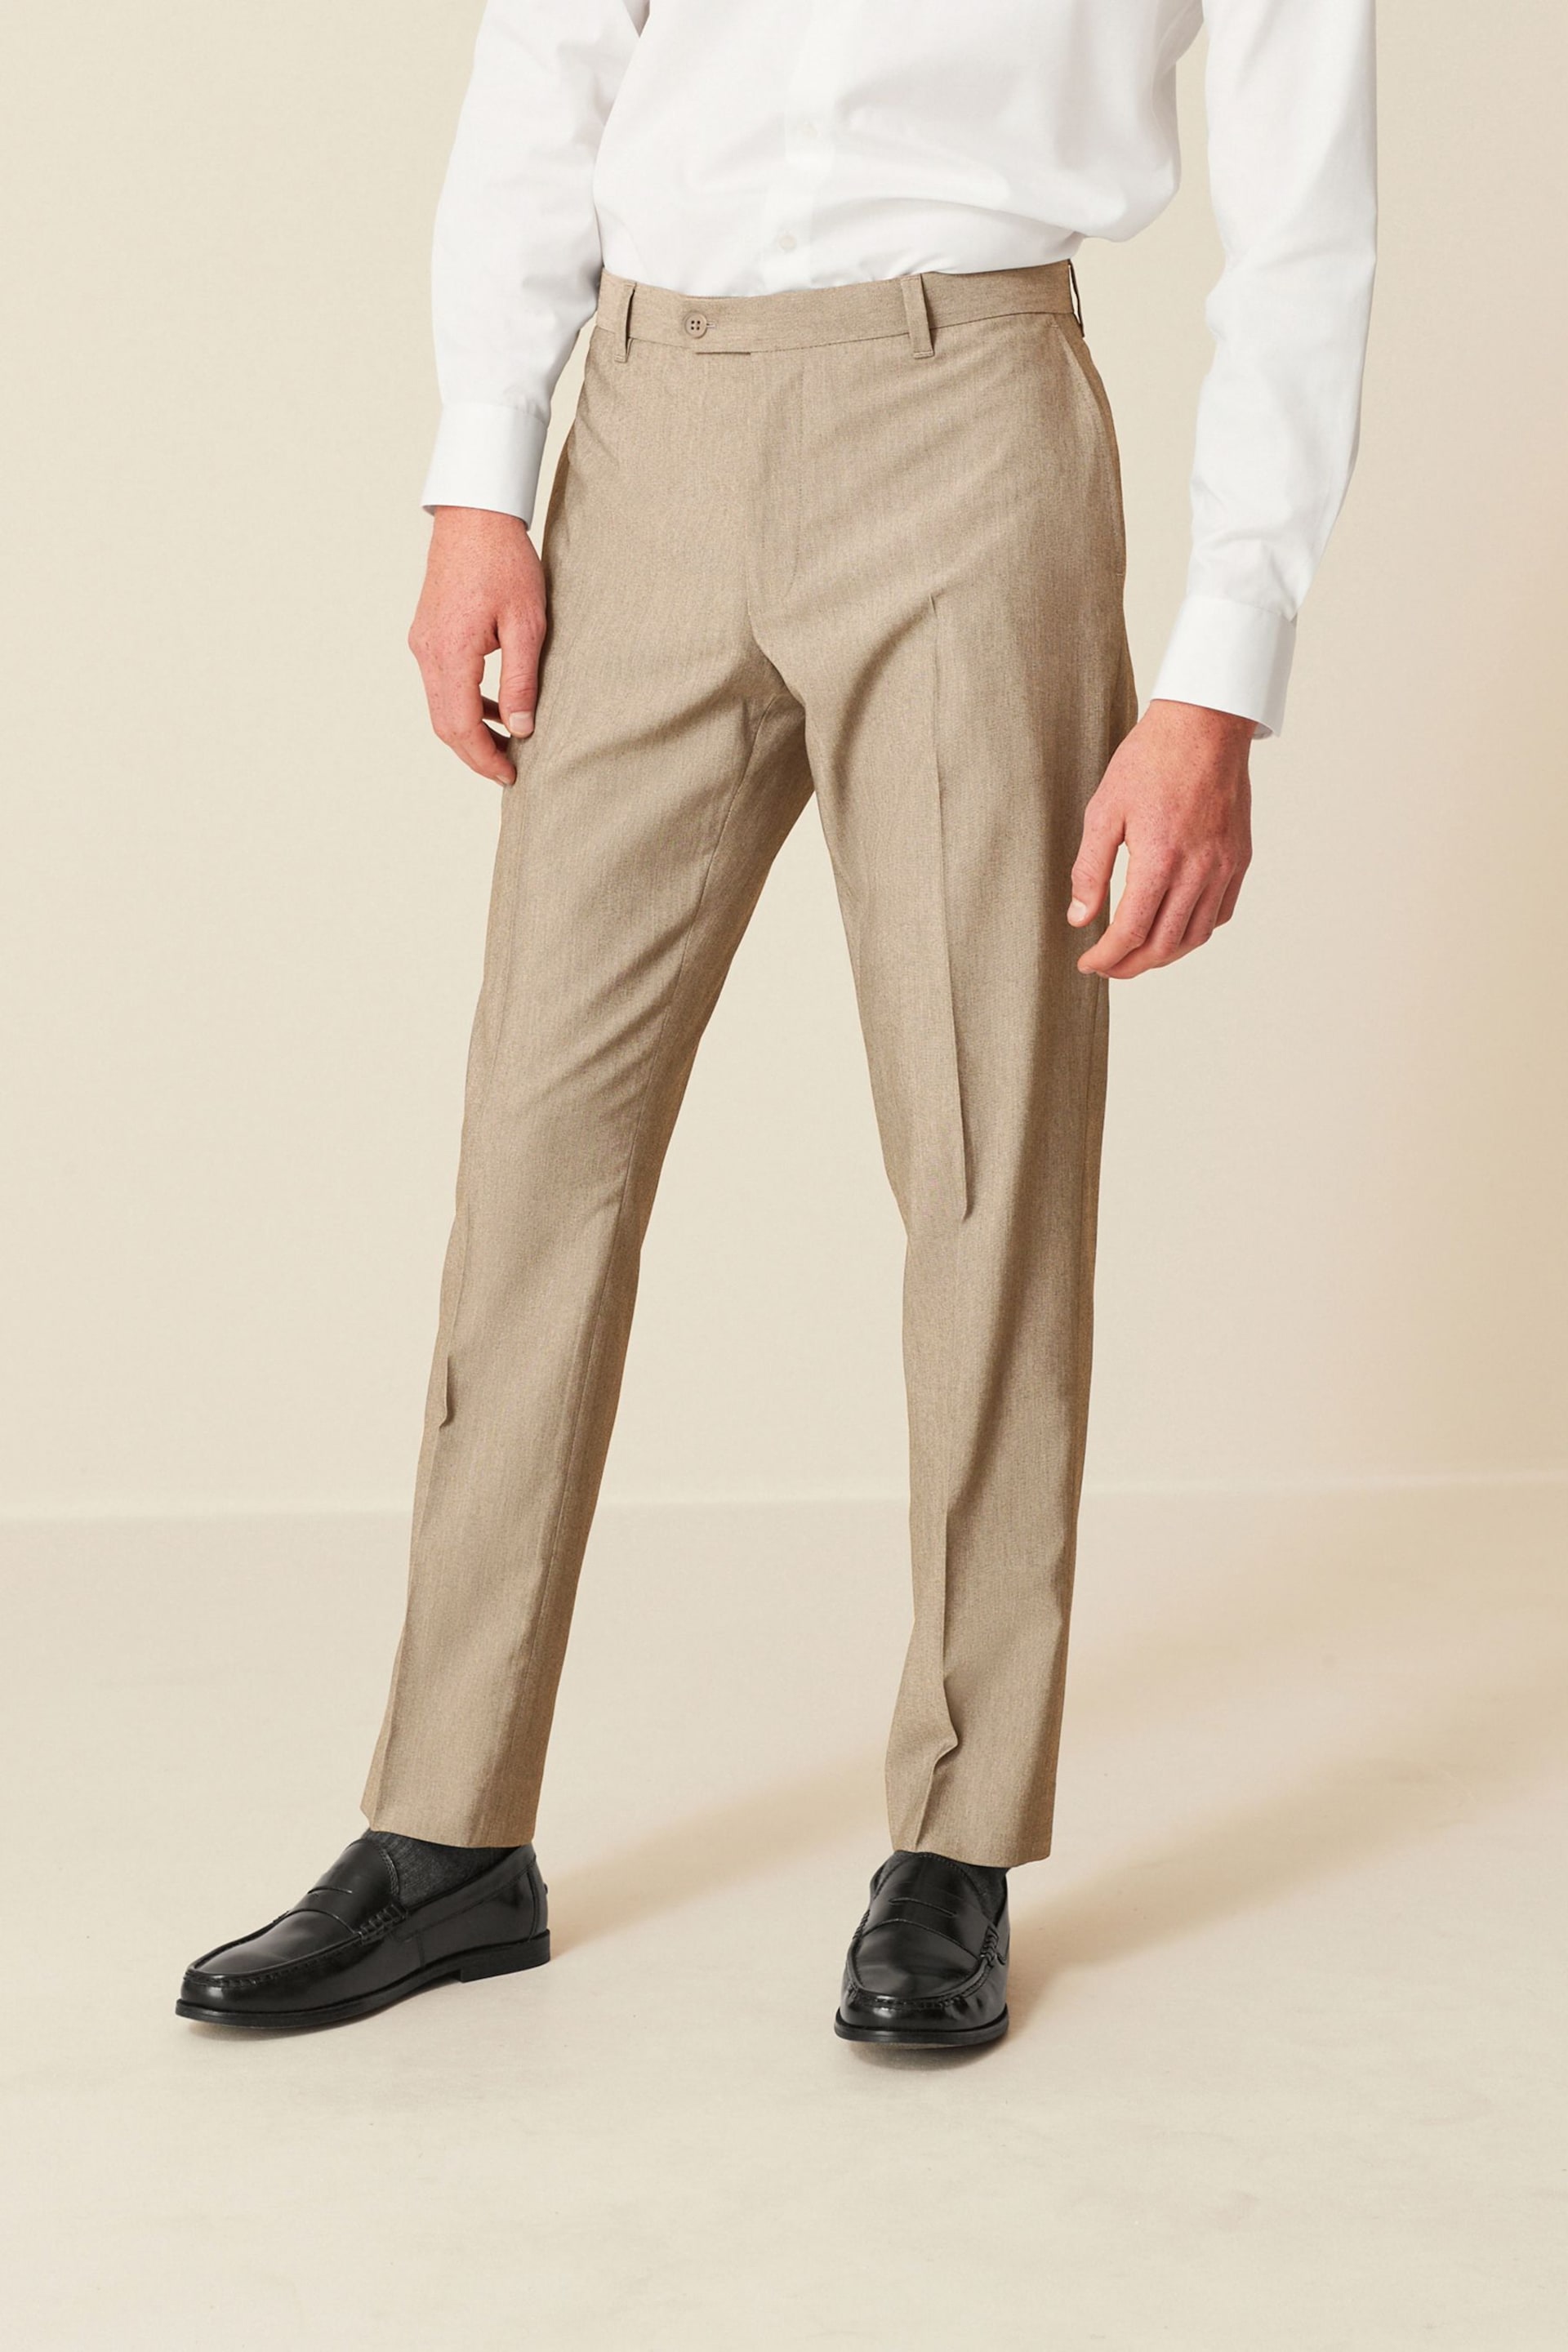 Stone Slim Stretch Smart Trousers - Image 1 of 8